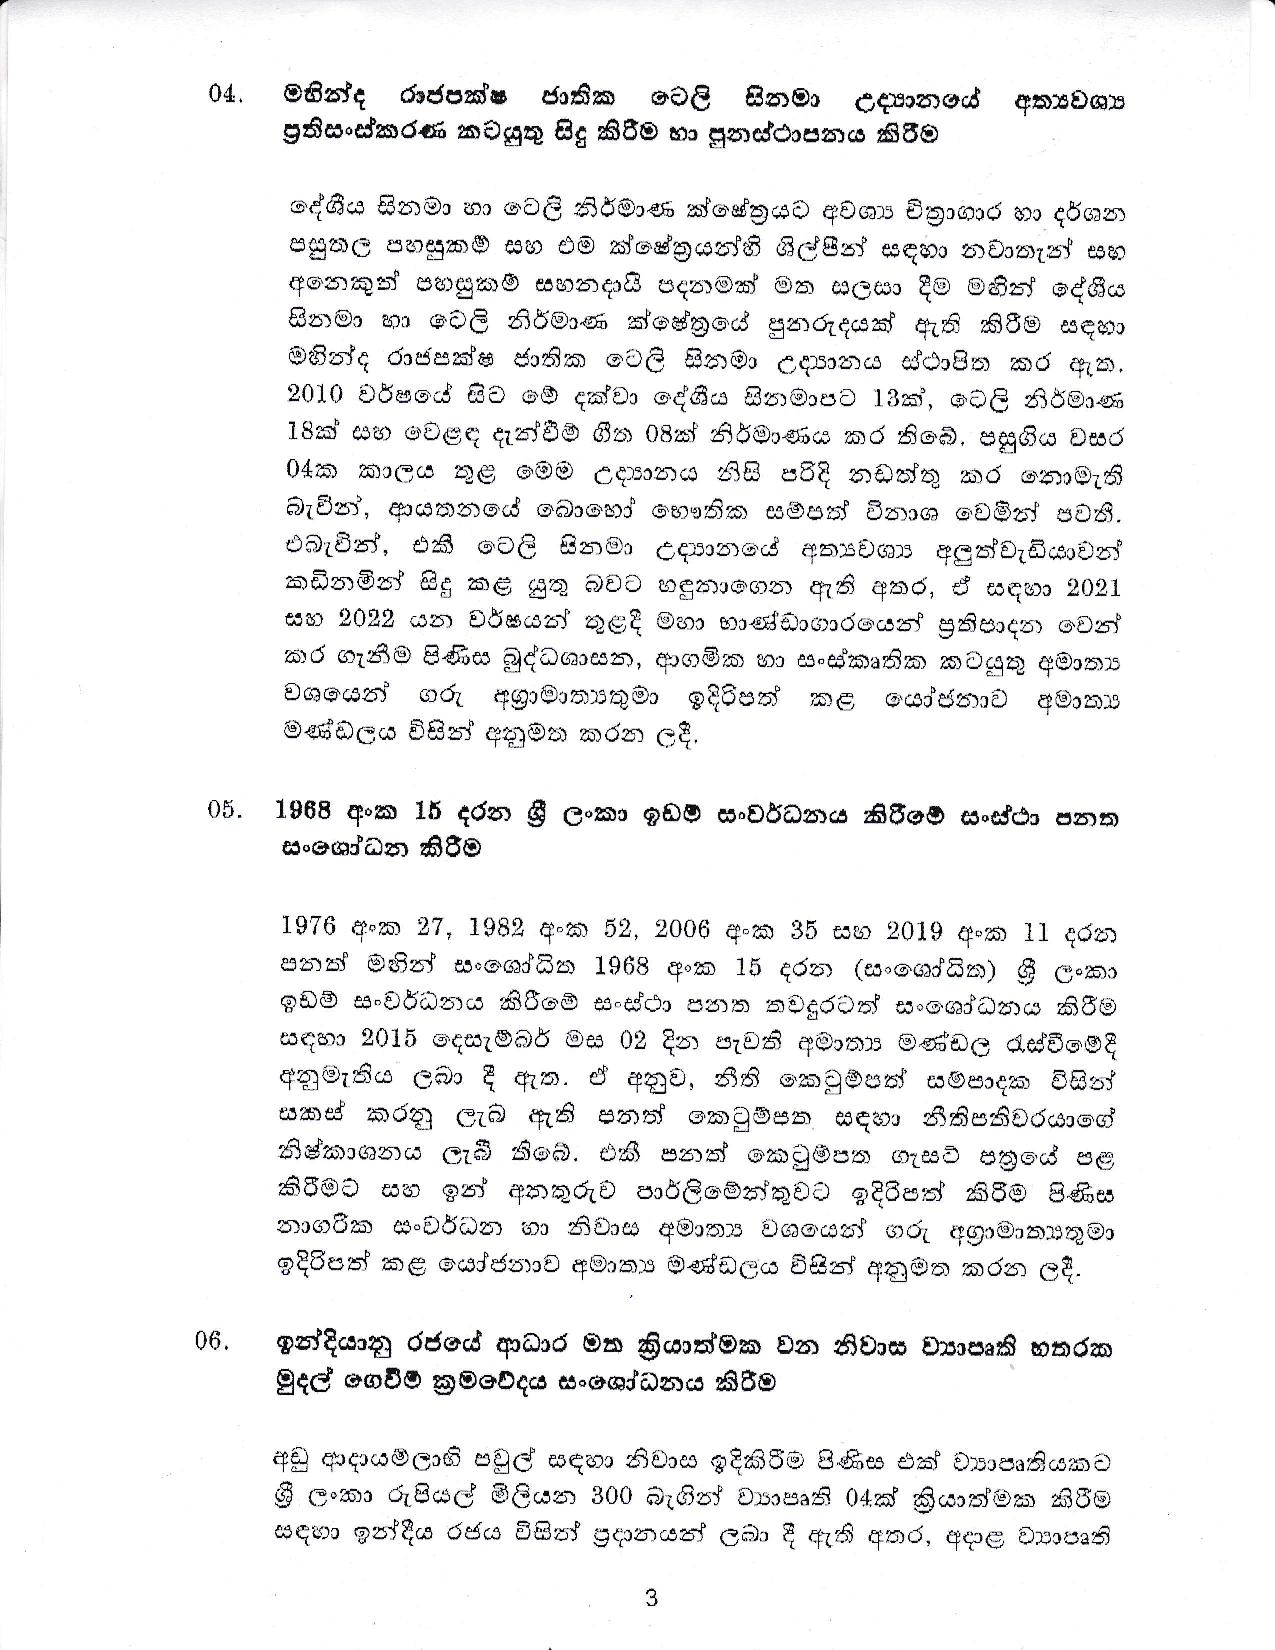 Cabinet Decision on 07.12.2020 page 003